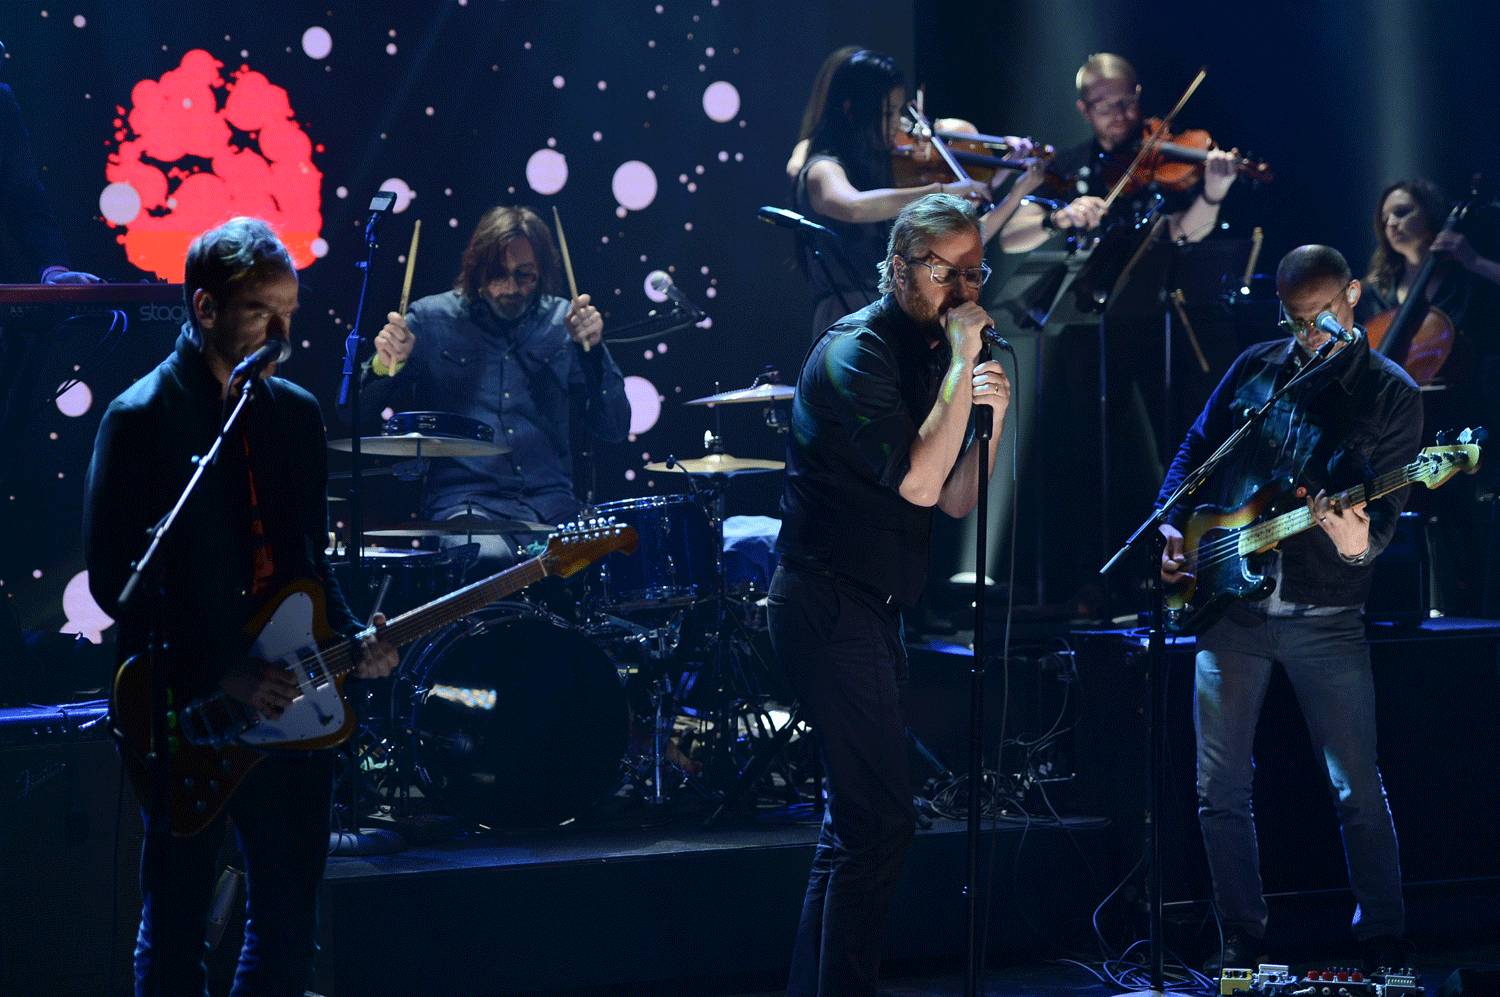 The National recently released the film Mistaken For Strangers